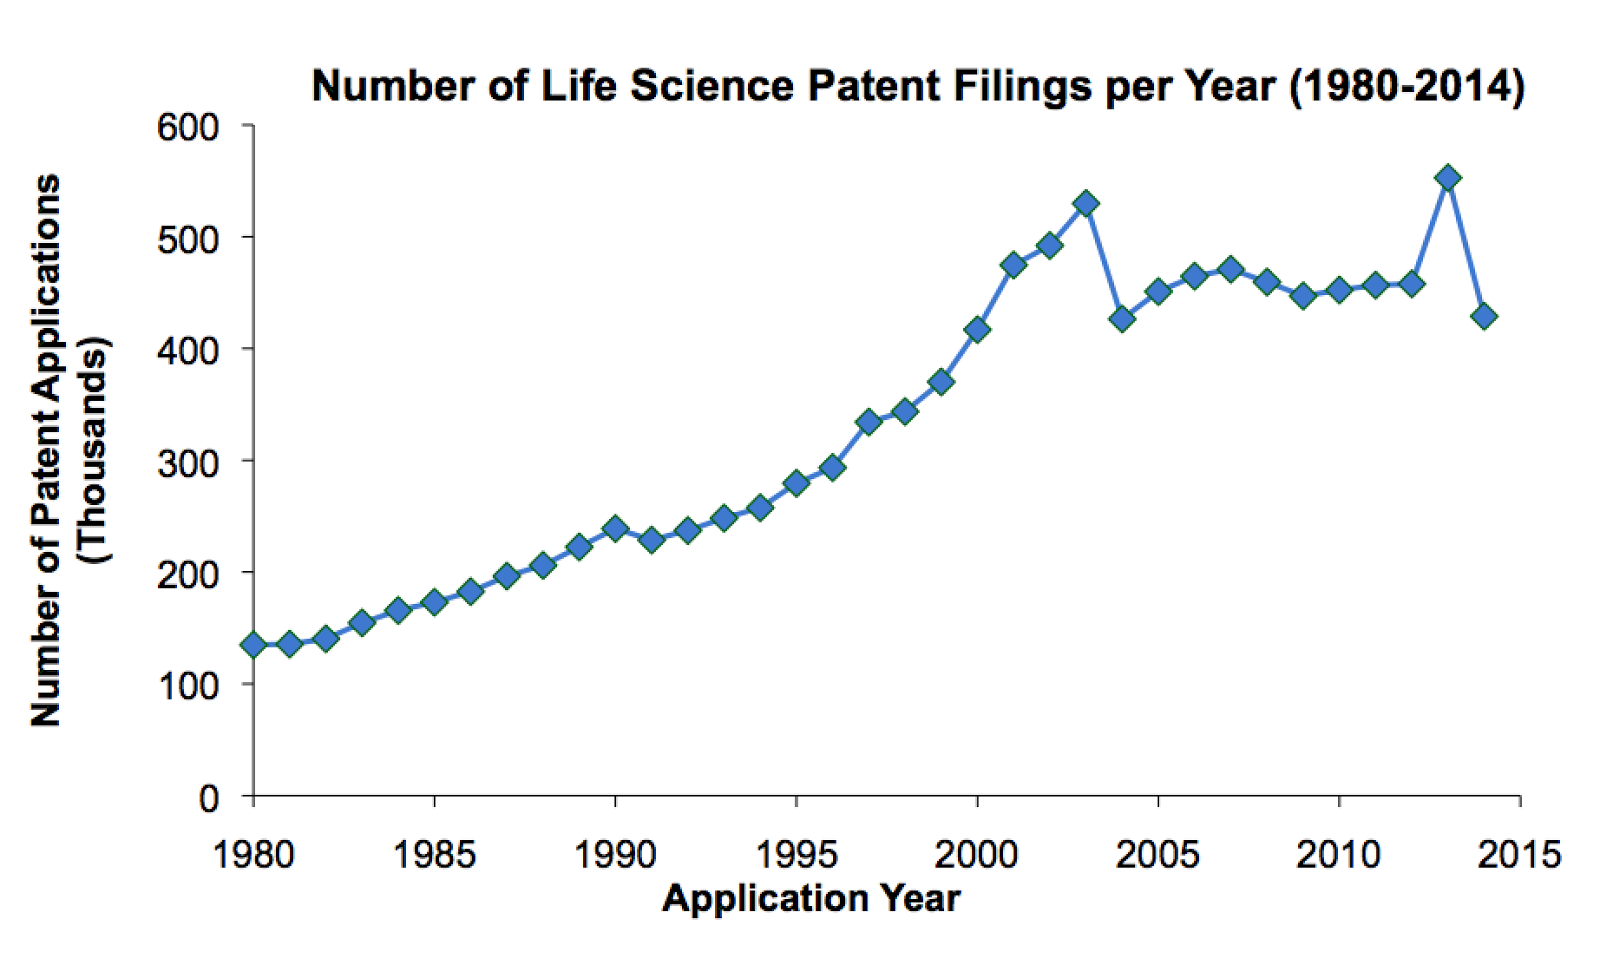 Life Science Patent Fillings